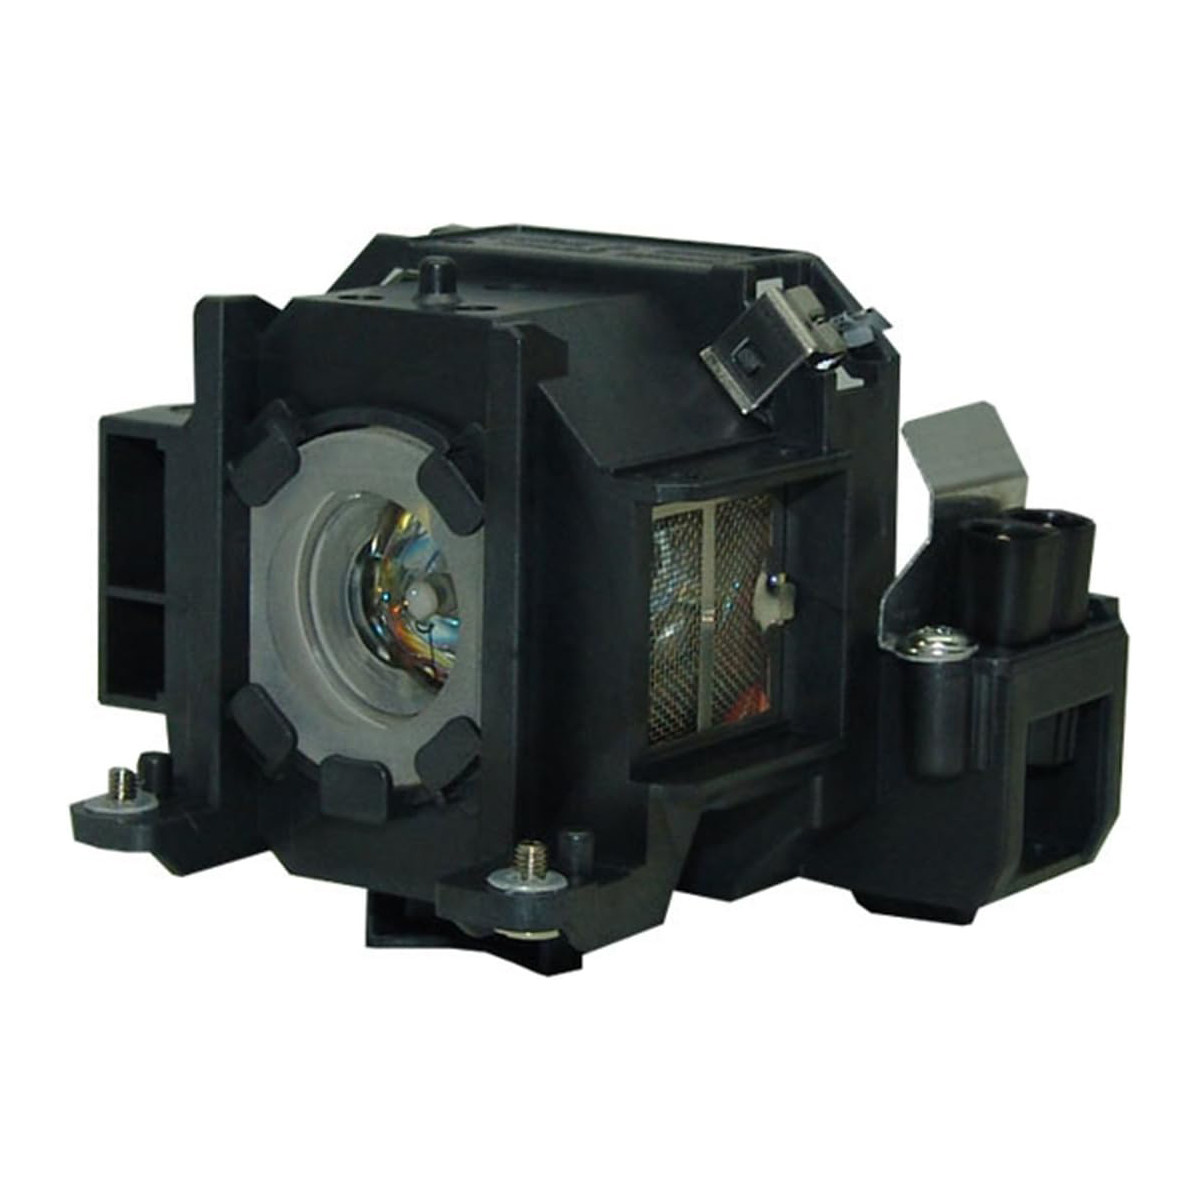 Replacement Projector lamp ELPLP38 For Epson EMP-1705 EMP-1707 EMP-1710 EMP-1715 EMP-1717